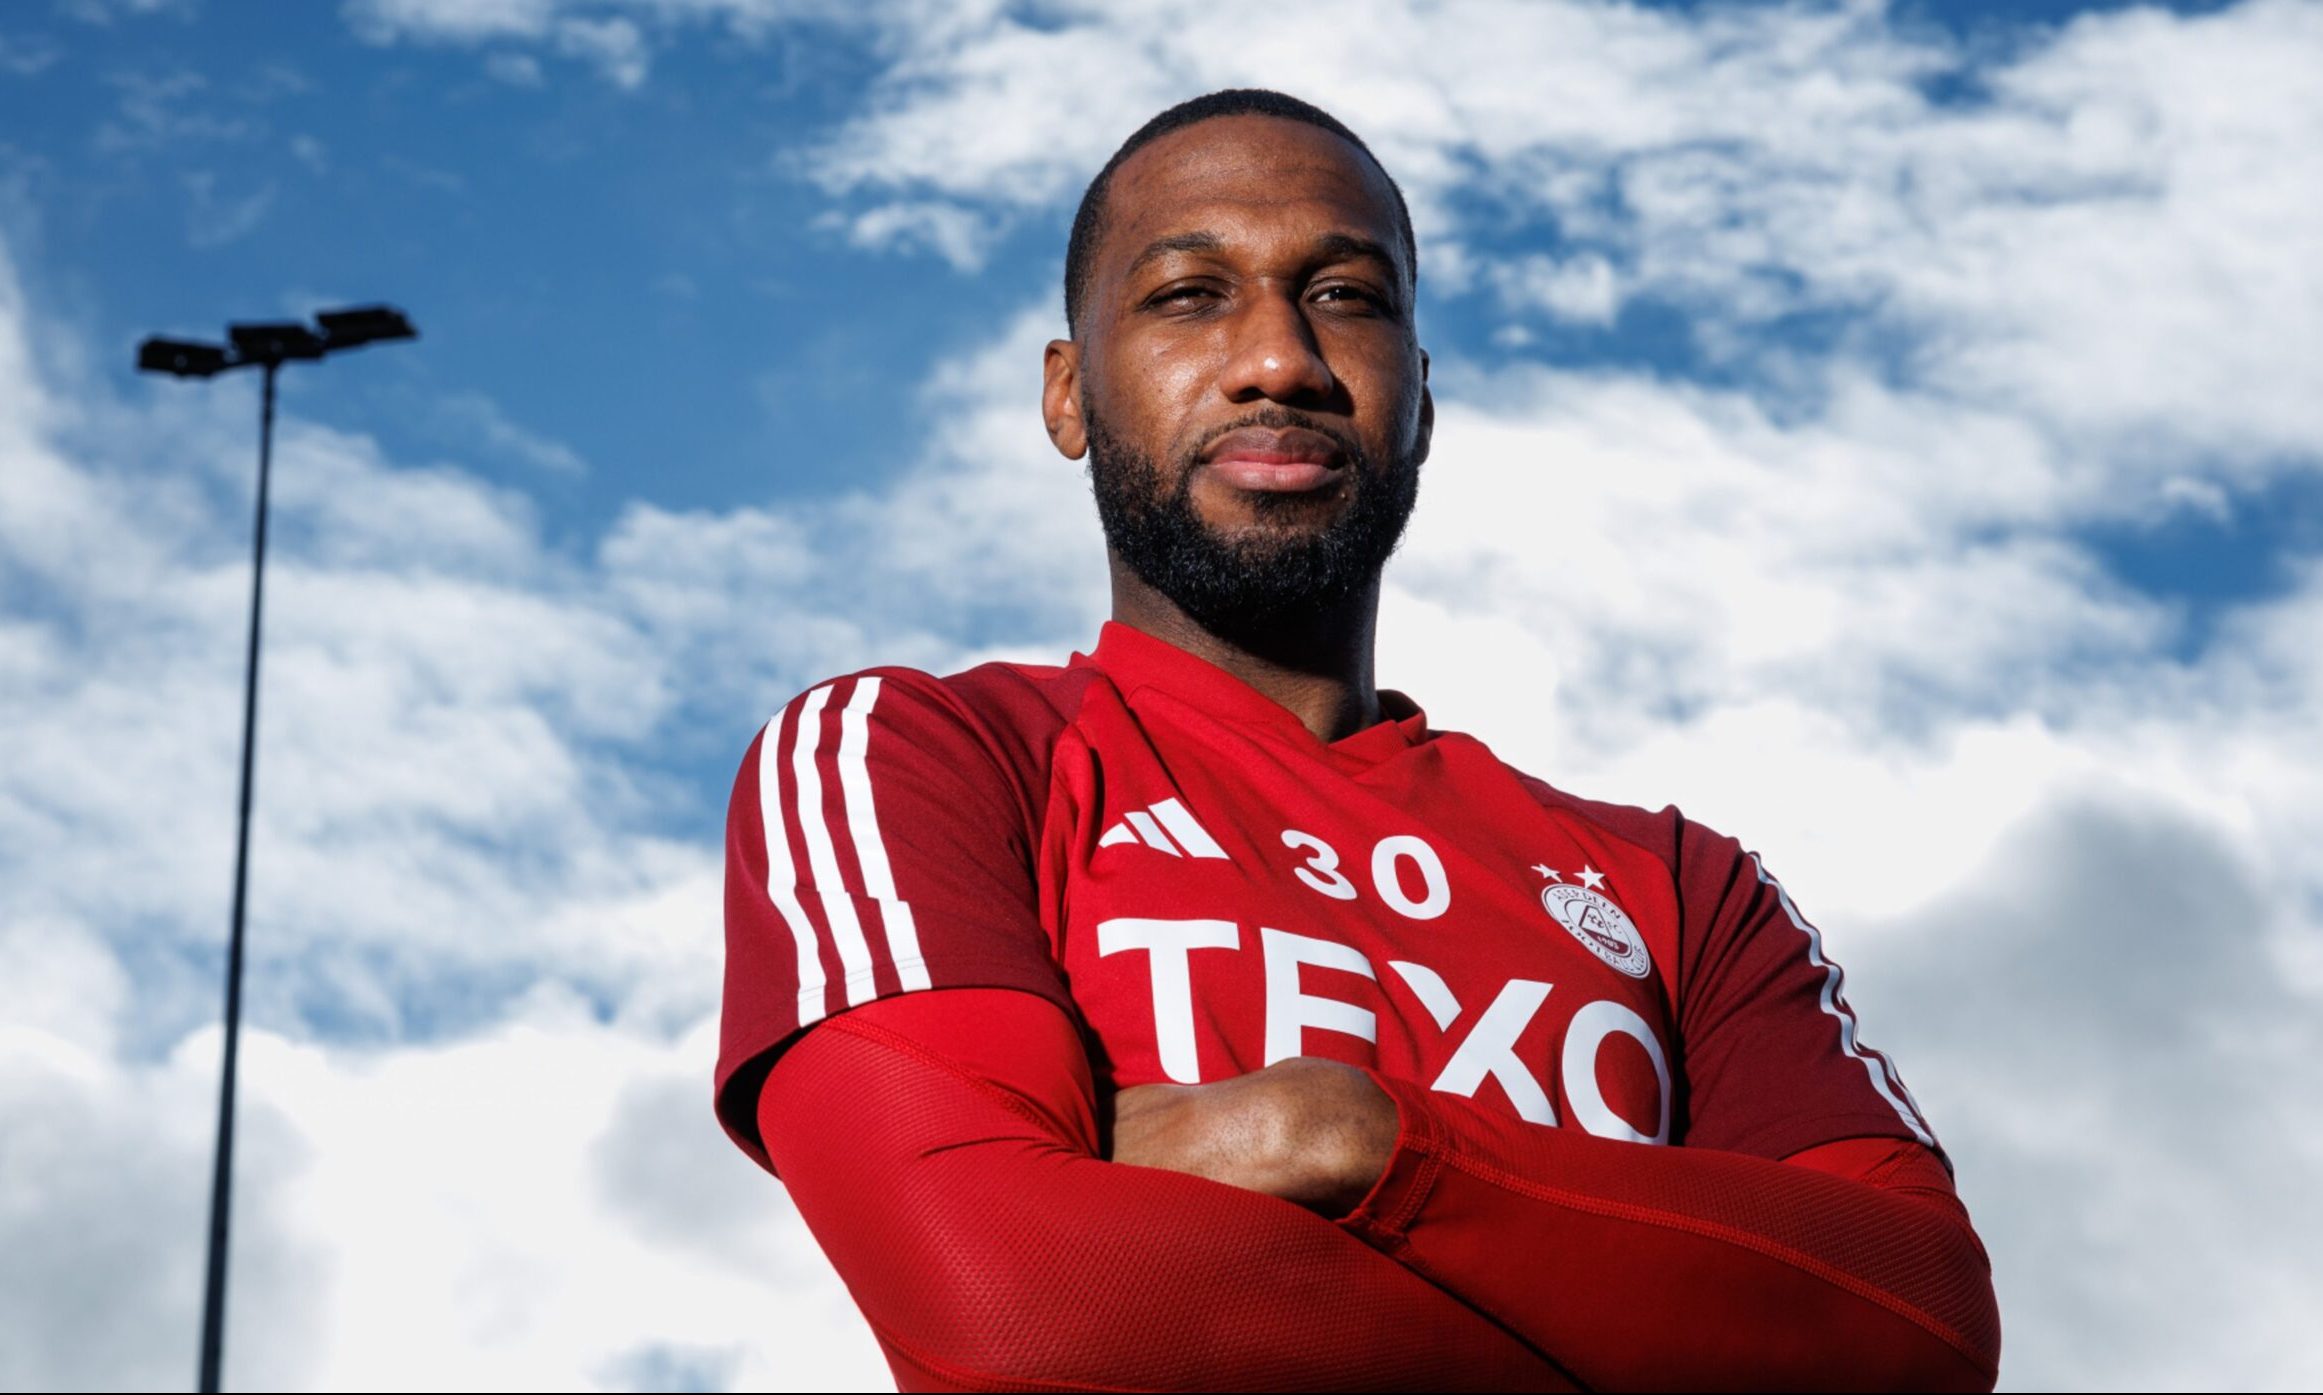 Aberdeen's Junior Hoilett targets Copa America place with Canada